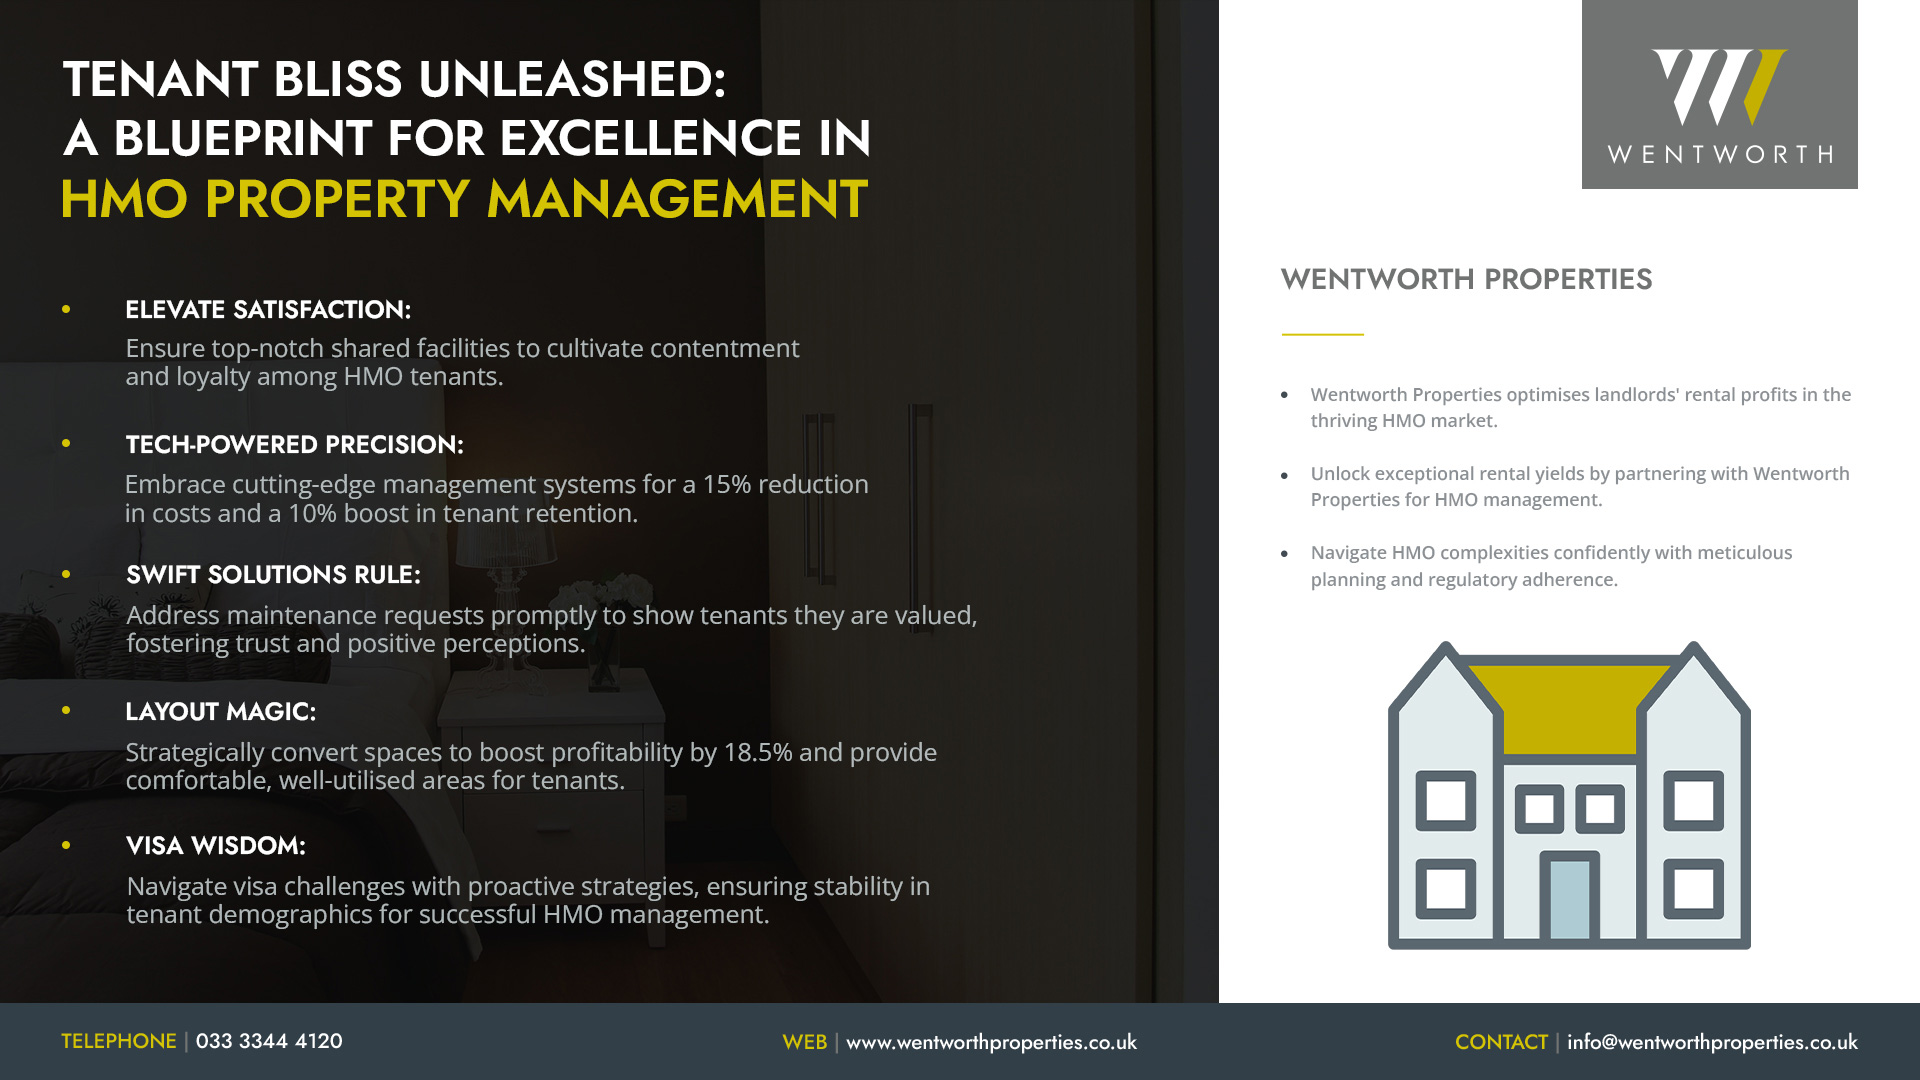 Information about HMO Property Management